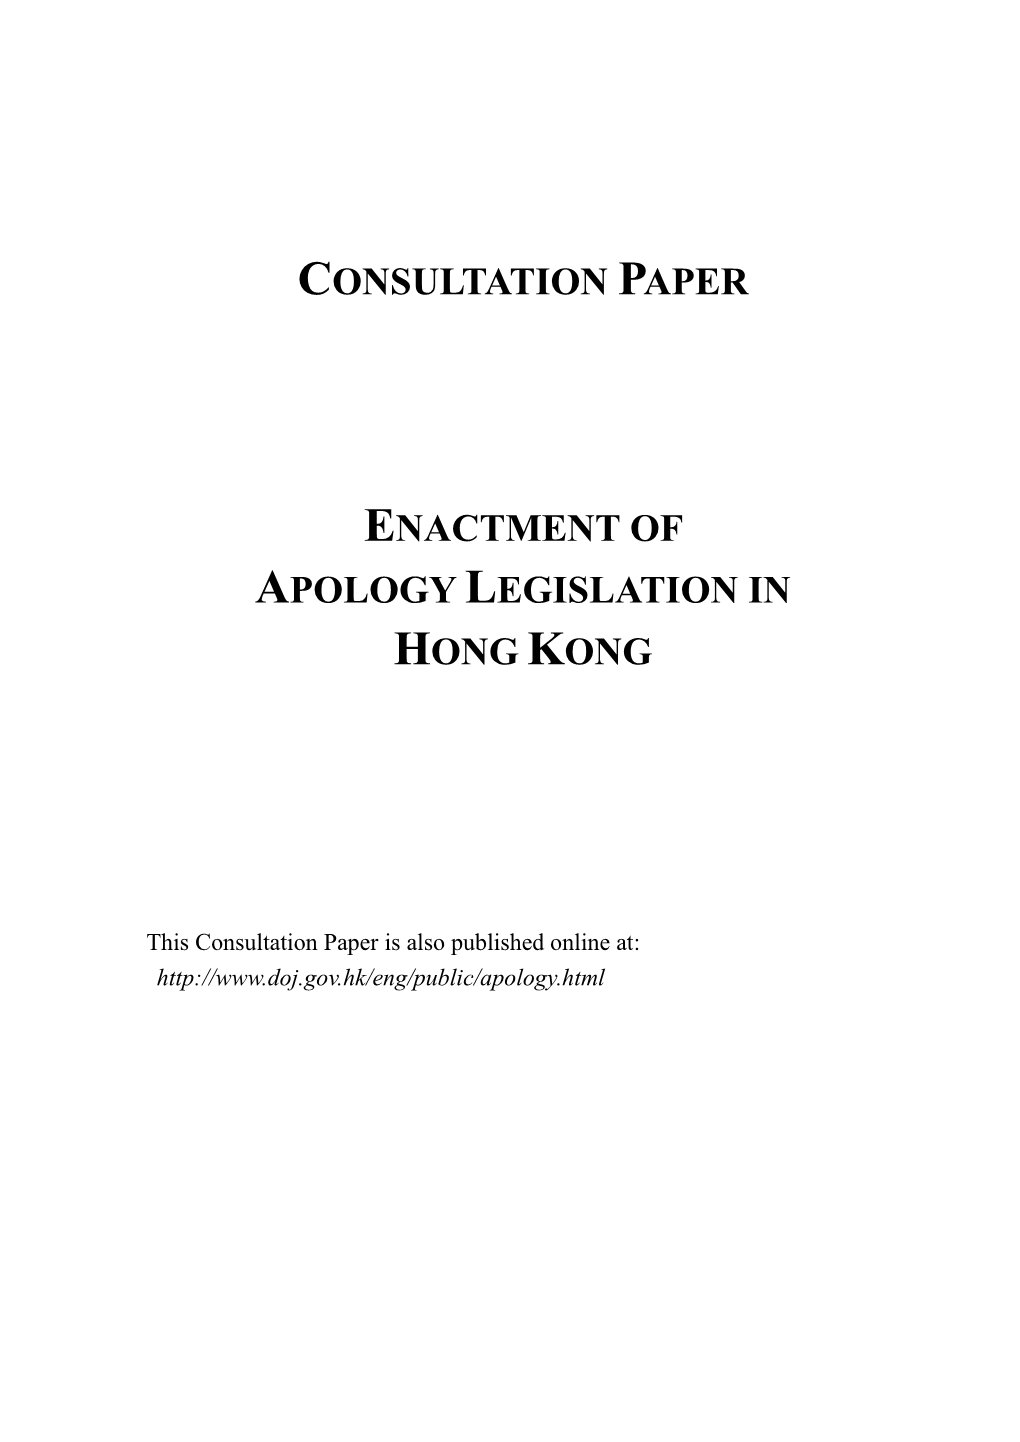 Consultation Paper: Enactment of Apology